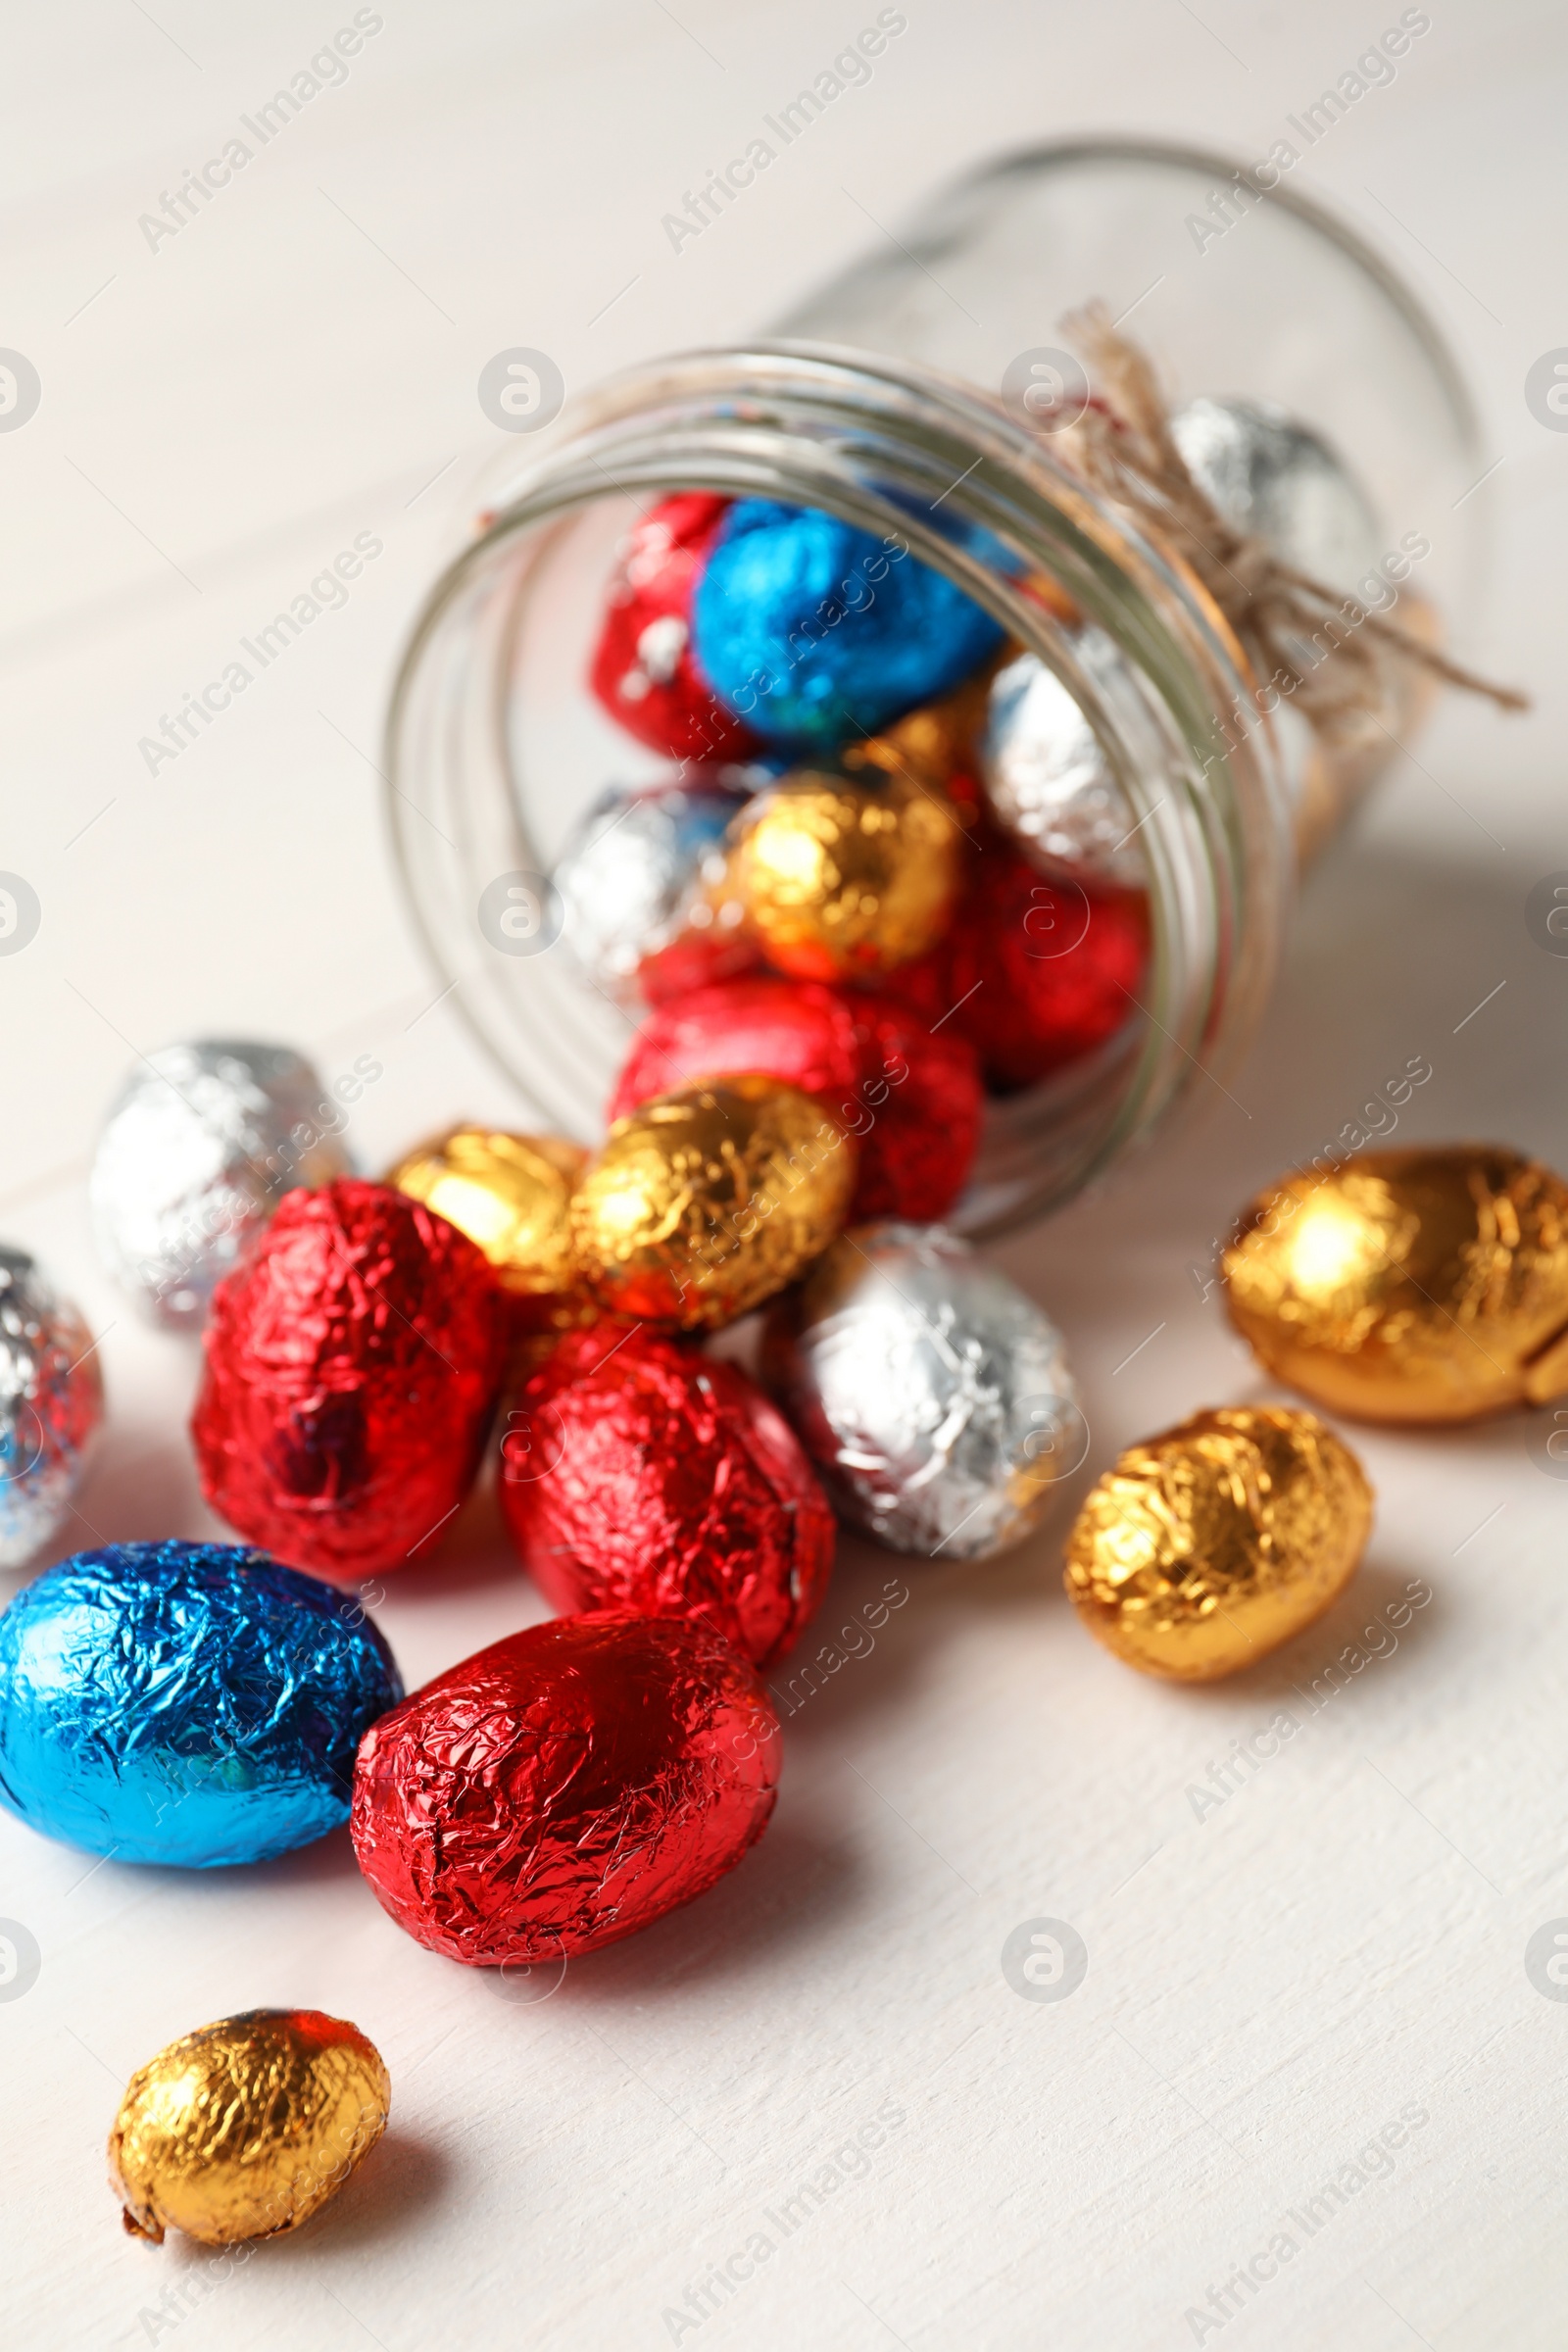 Photo of Overturned glass jar with chocolate eggs wrapped in colorful foil on white wooden table